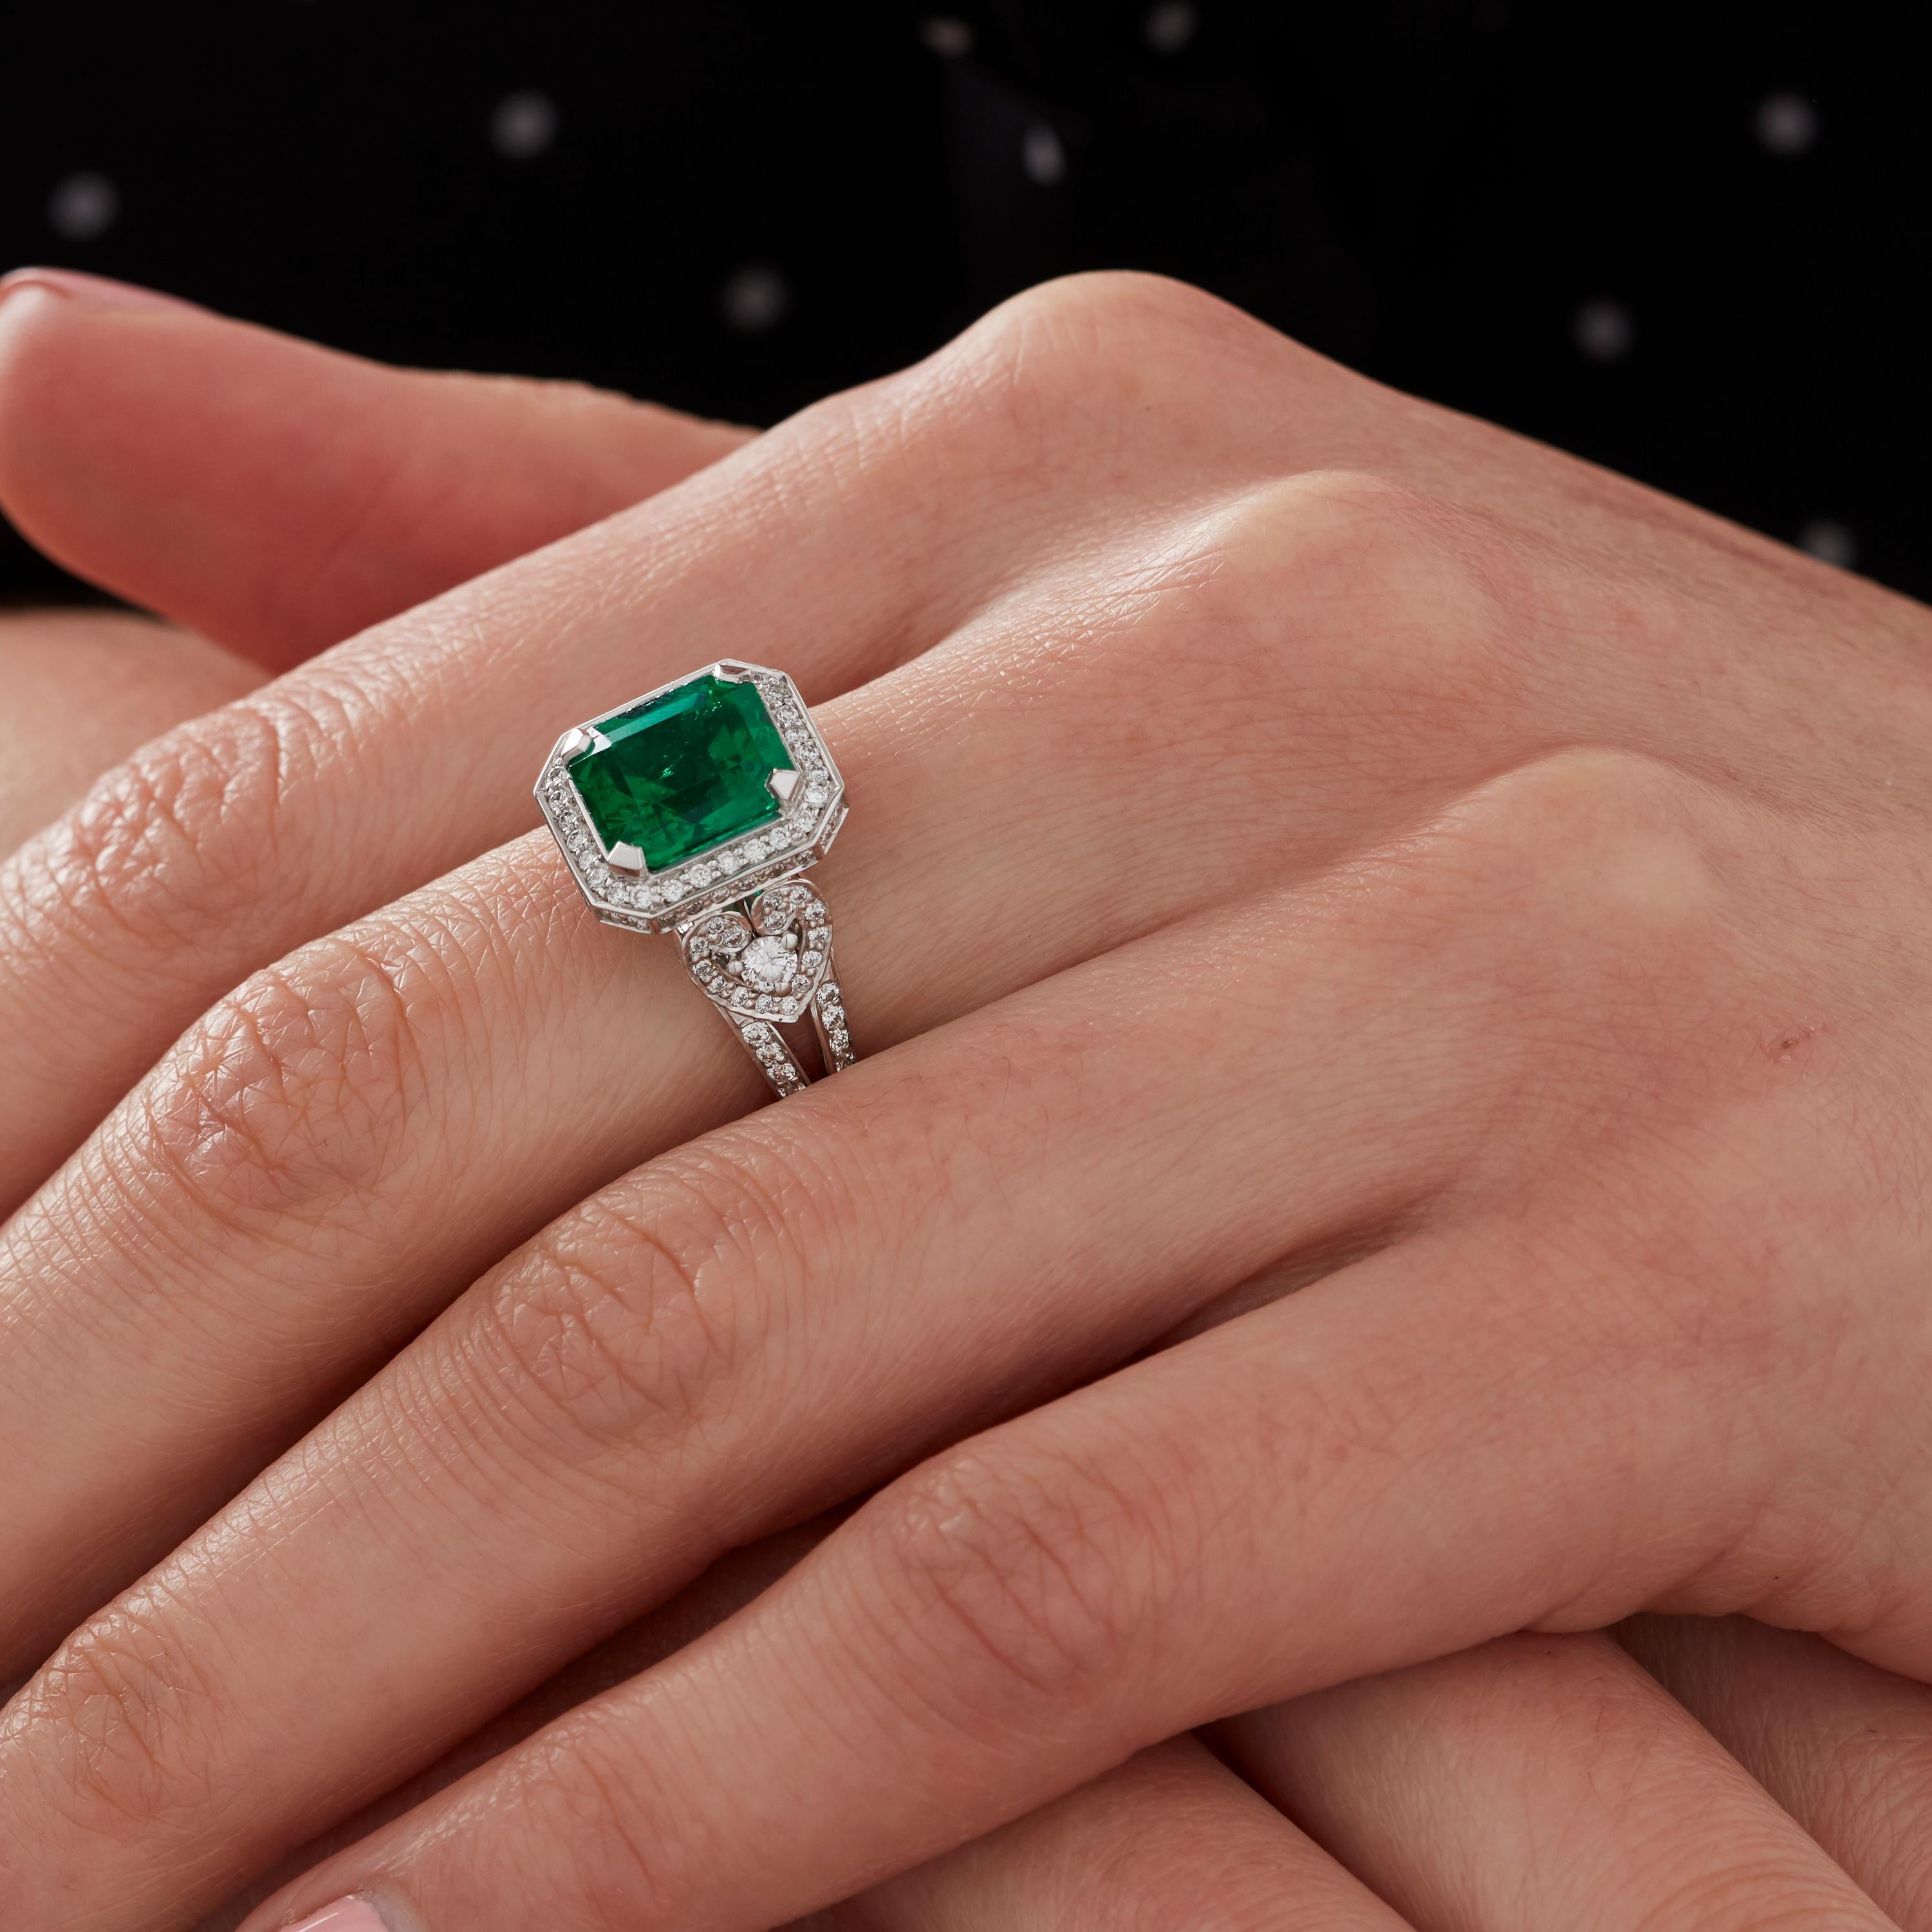 A House of Garrard 'Jewelled Vault' 18 Karat ring, set with round white diamonds and a central Columbian emerald cut emerald.

1 emerald cut emerald weighing: 3.03cts                                                                                   